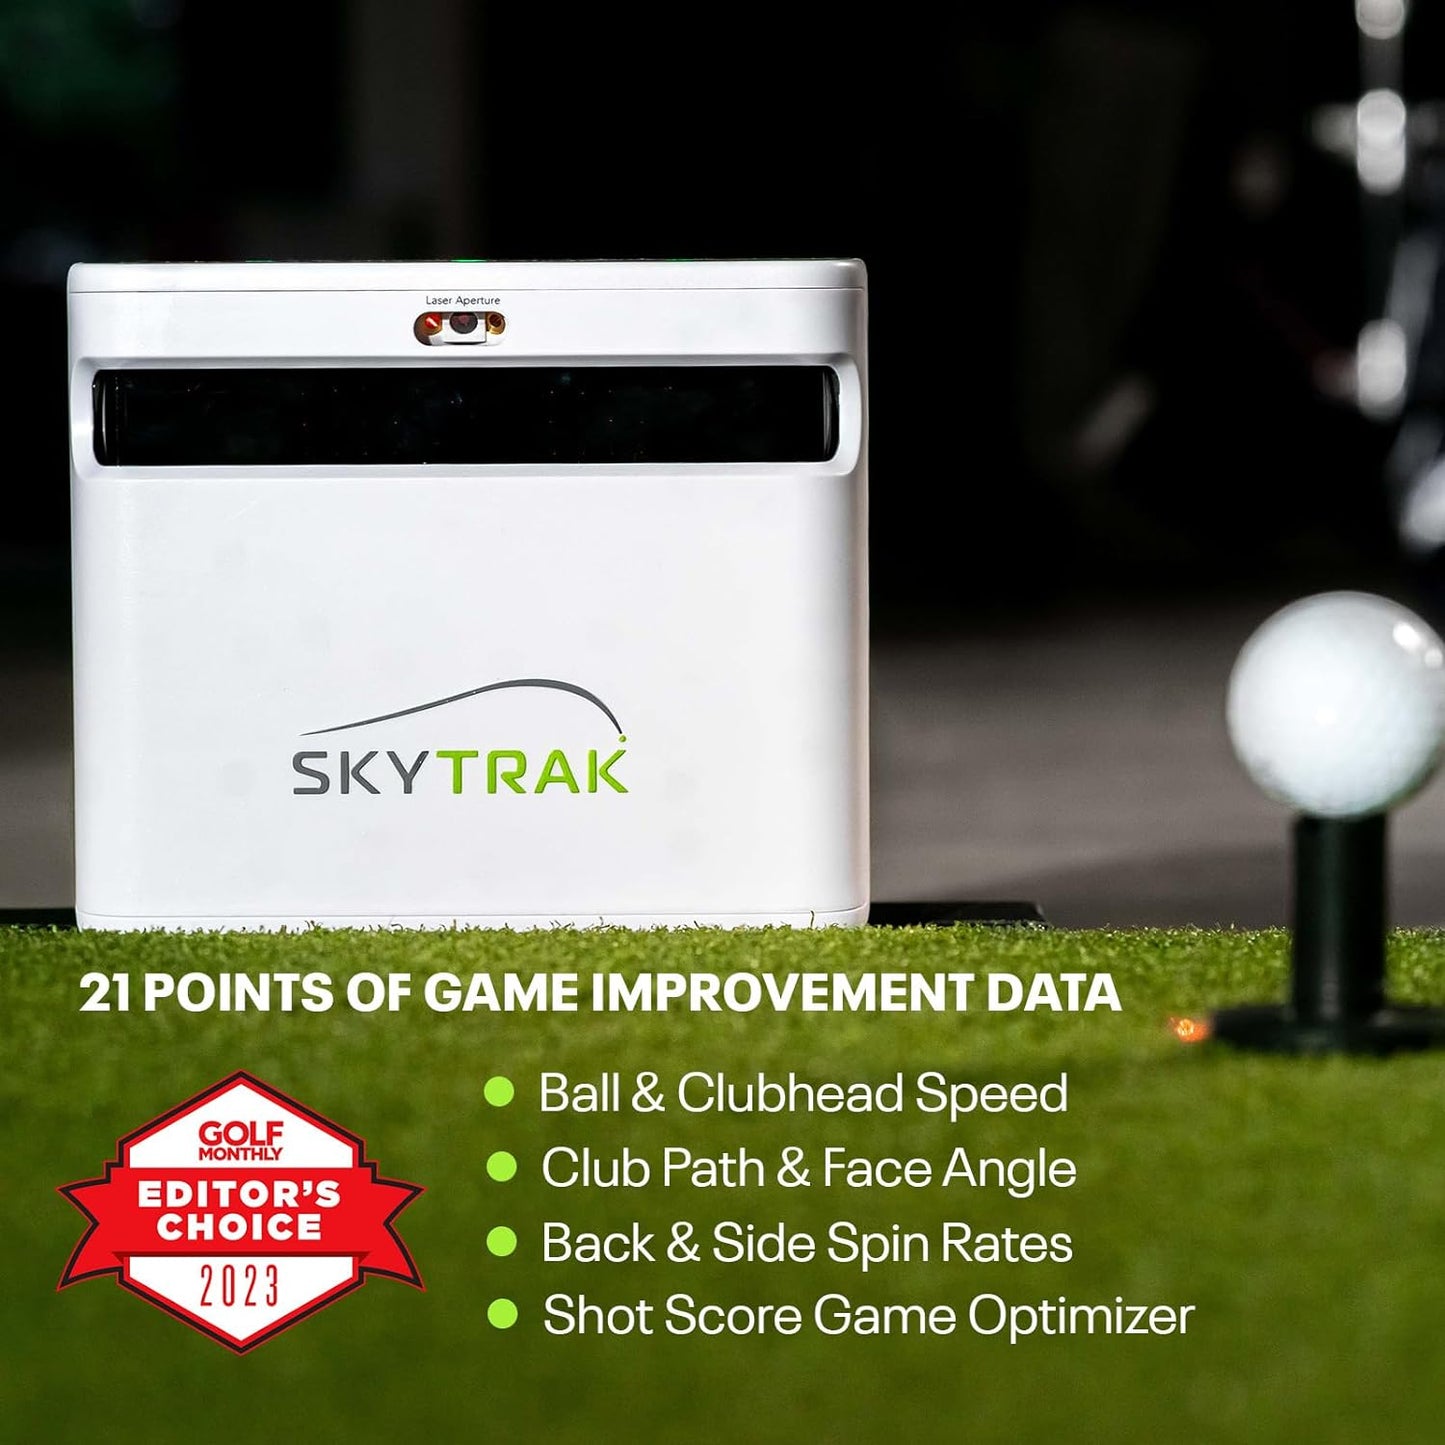 + Launch Monitor and Golf Simulator - Tour-Level Golf Analysis with Dual Doppler Radar, Enhanced Camera, 100K+ Courses, Real-Time Gameplay Simulation, Wi-Fi, USB-C Charging